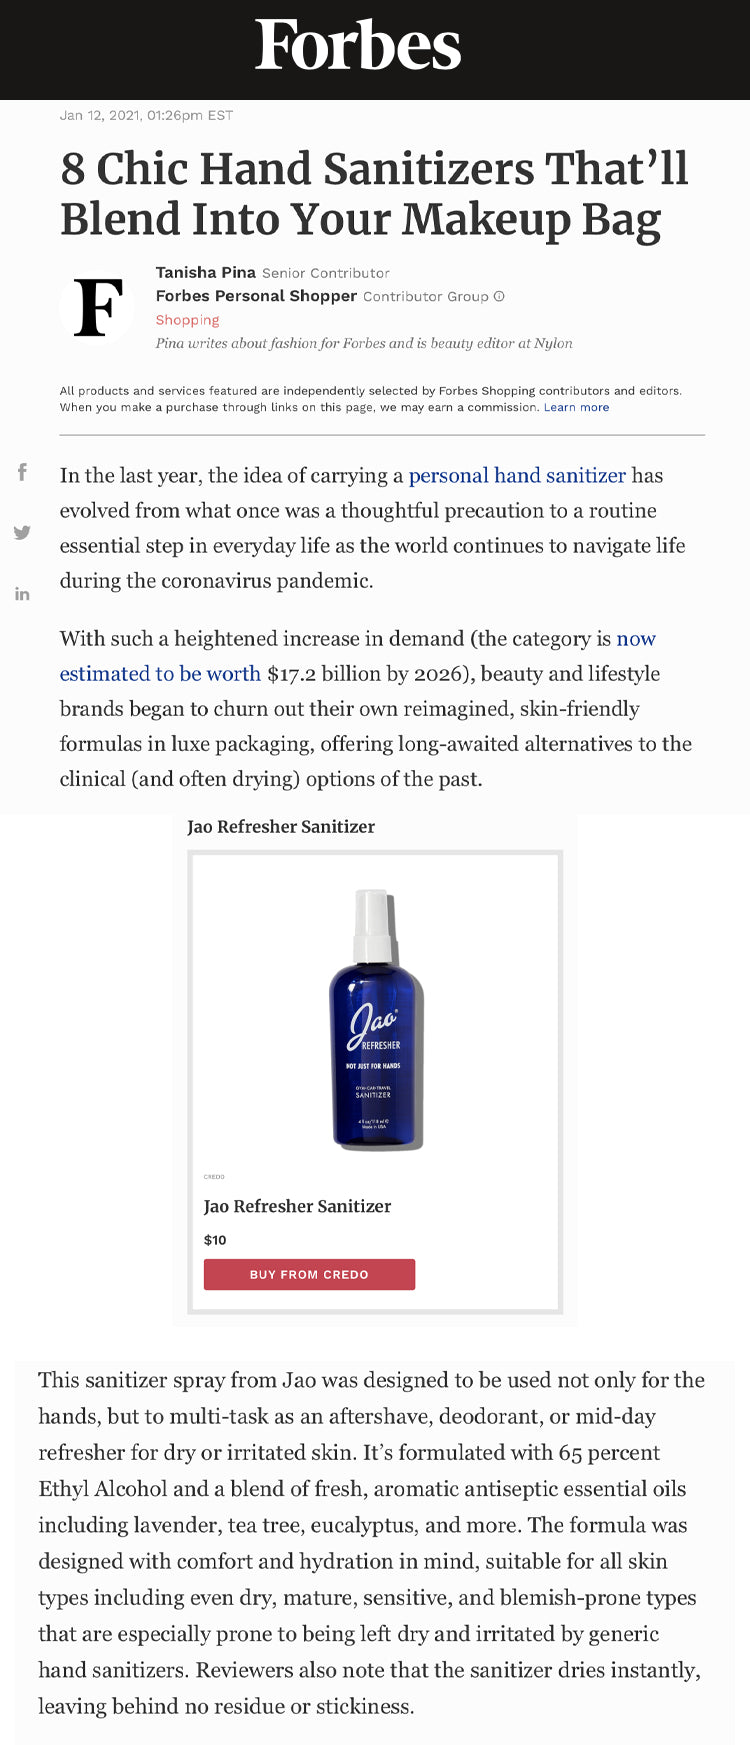 Forbes: Chic Hand Sanitizers That’ll Blend Into Your Makeup Bag Jao Refresher